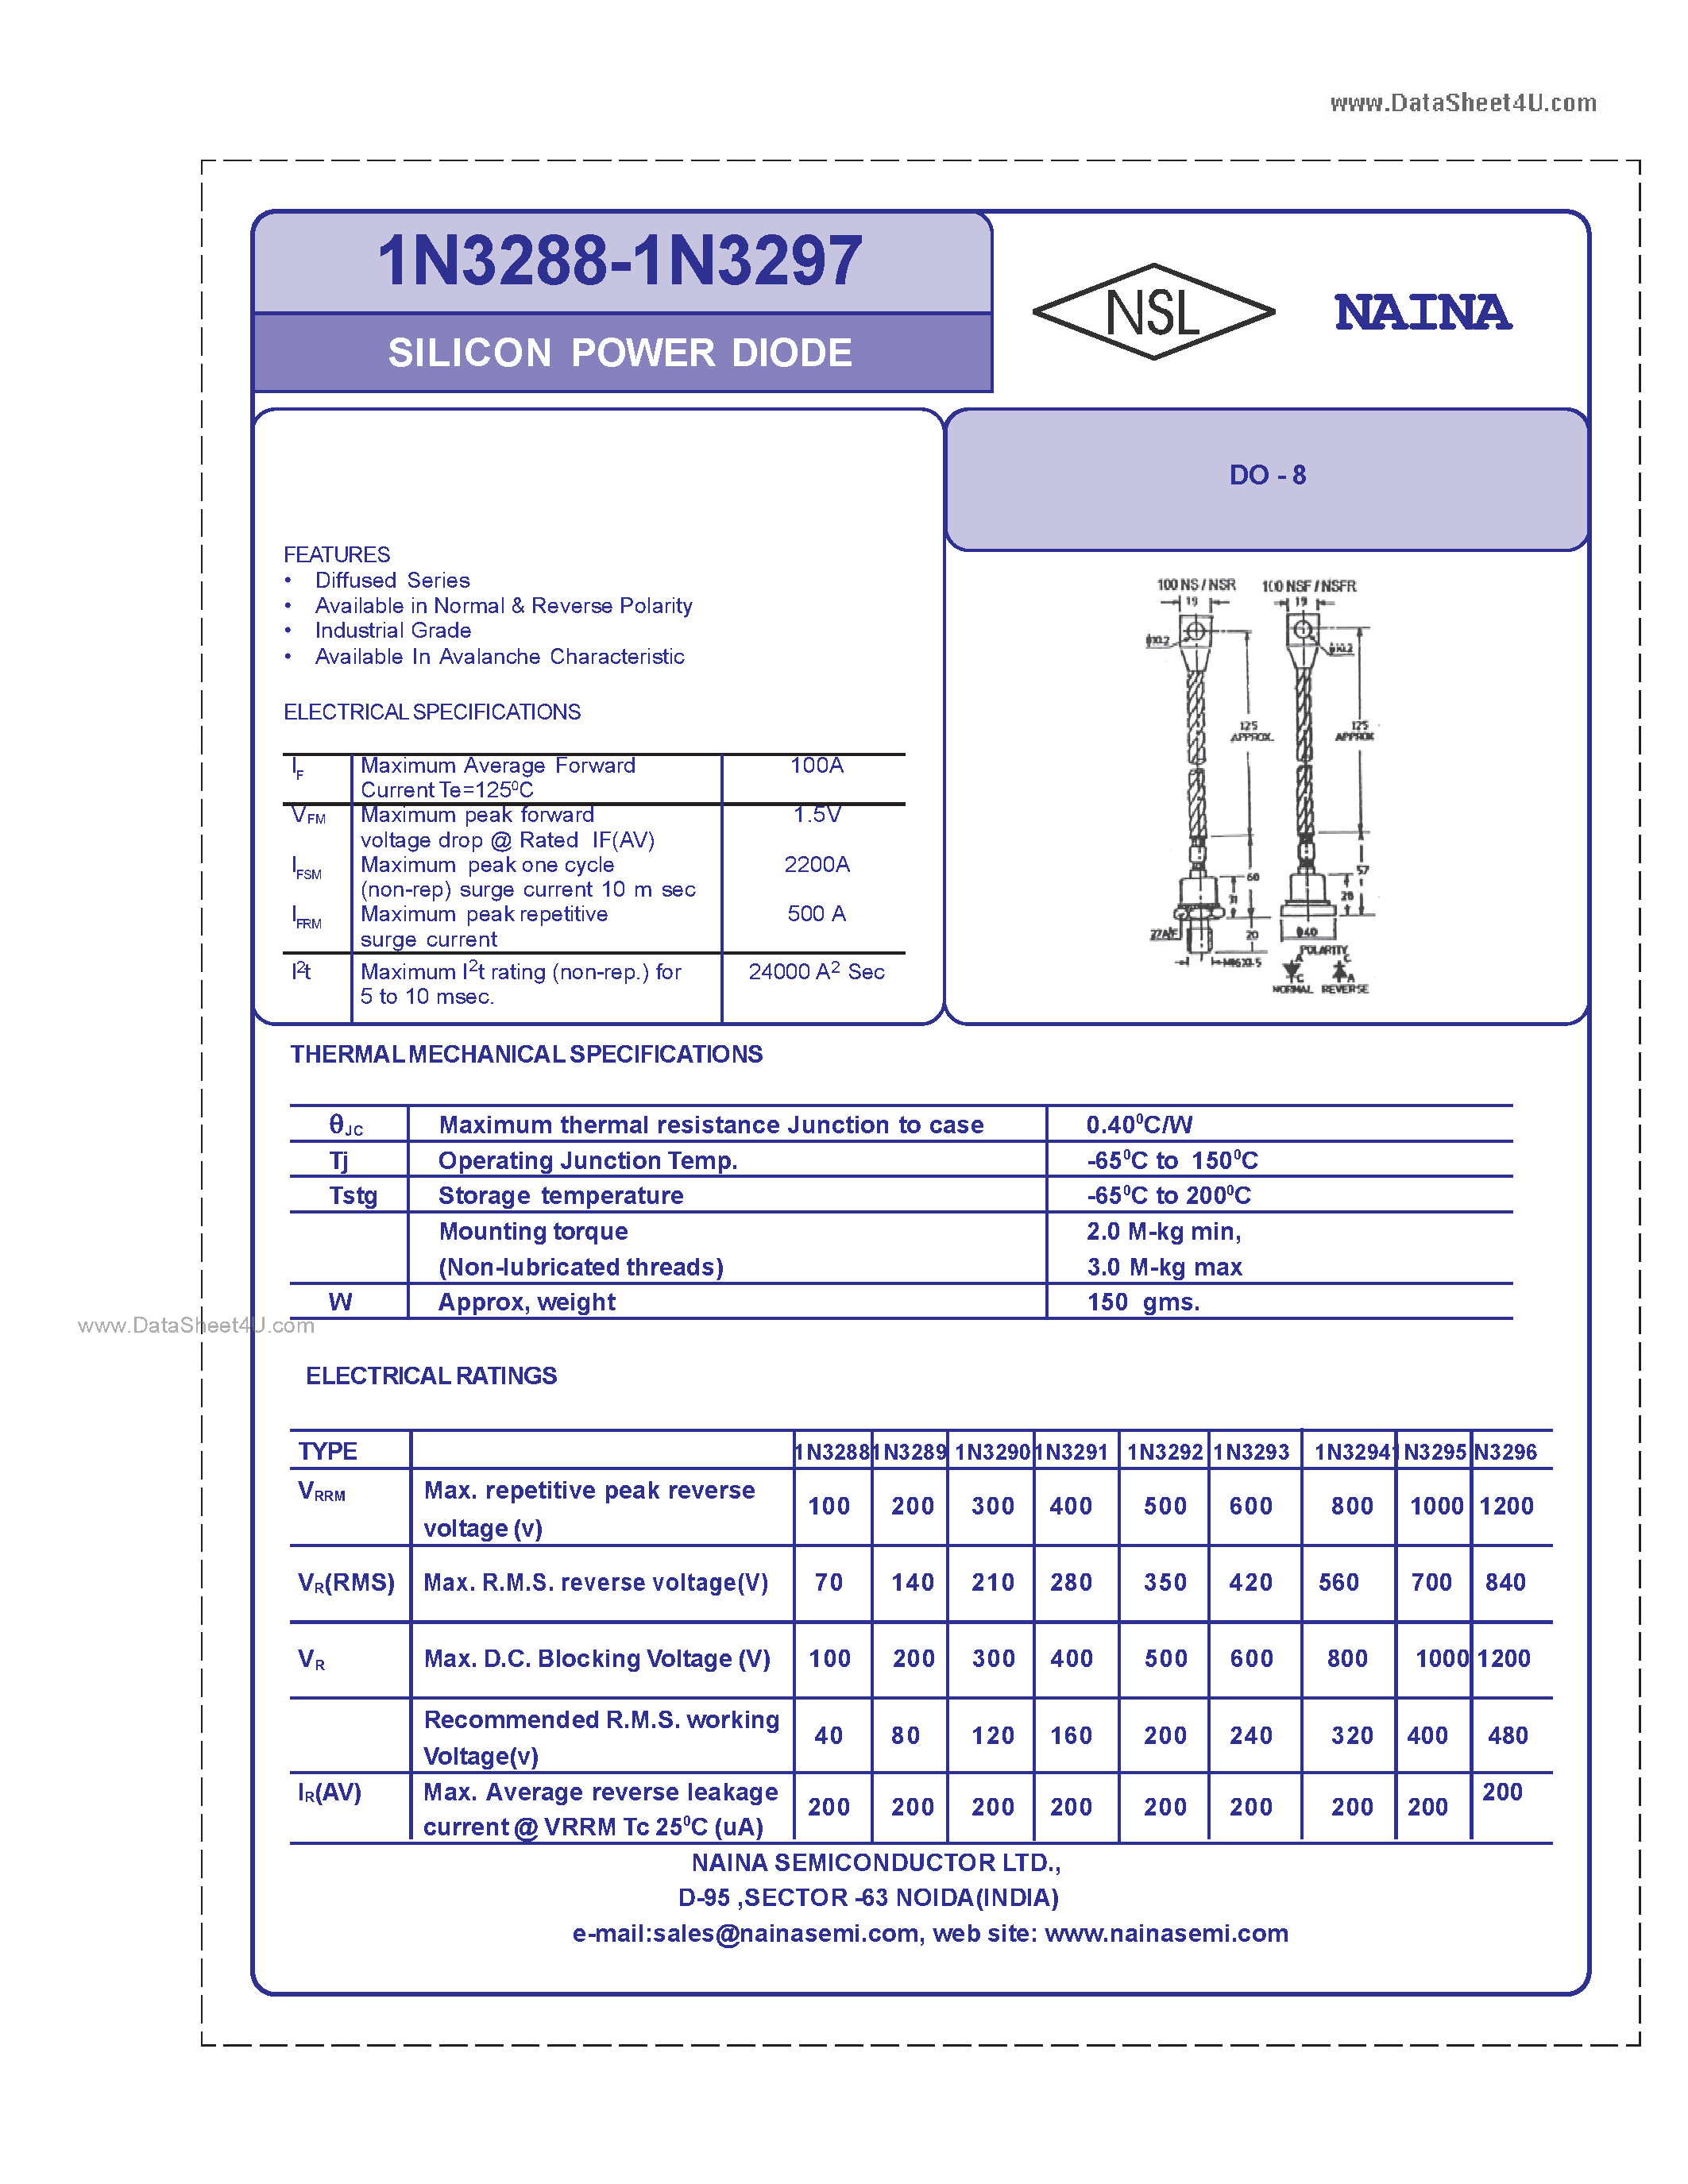 Datasheet 1N3288 - (1N3288 - 1N3297) SILICON POWER DIODE page 1